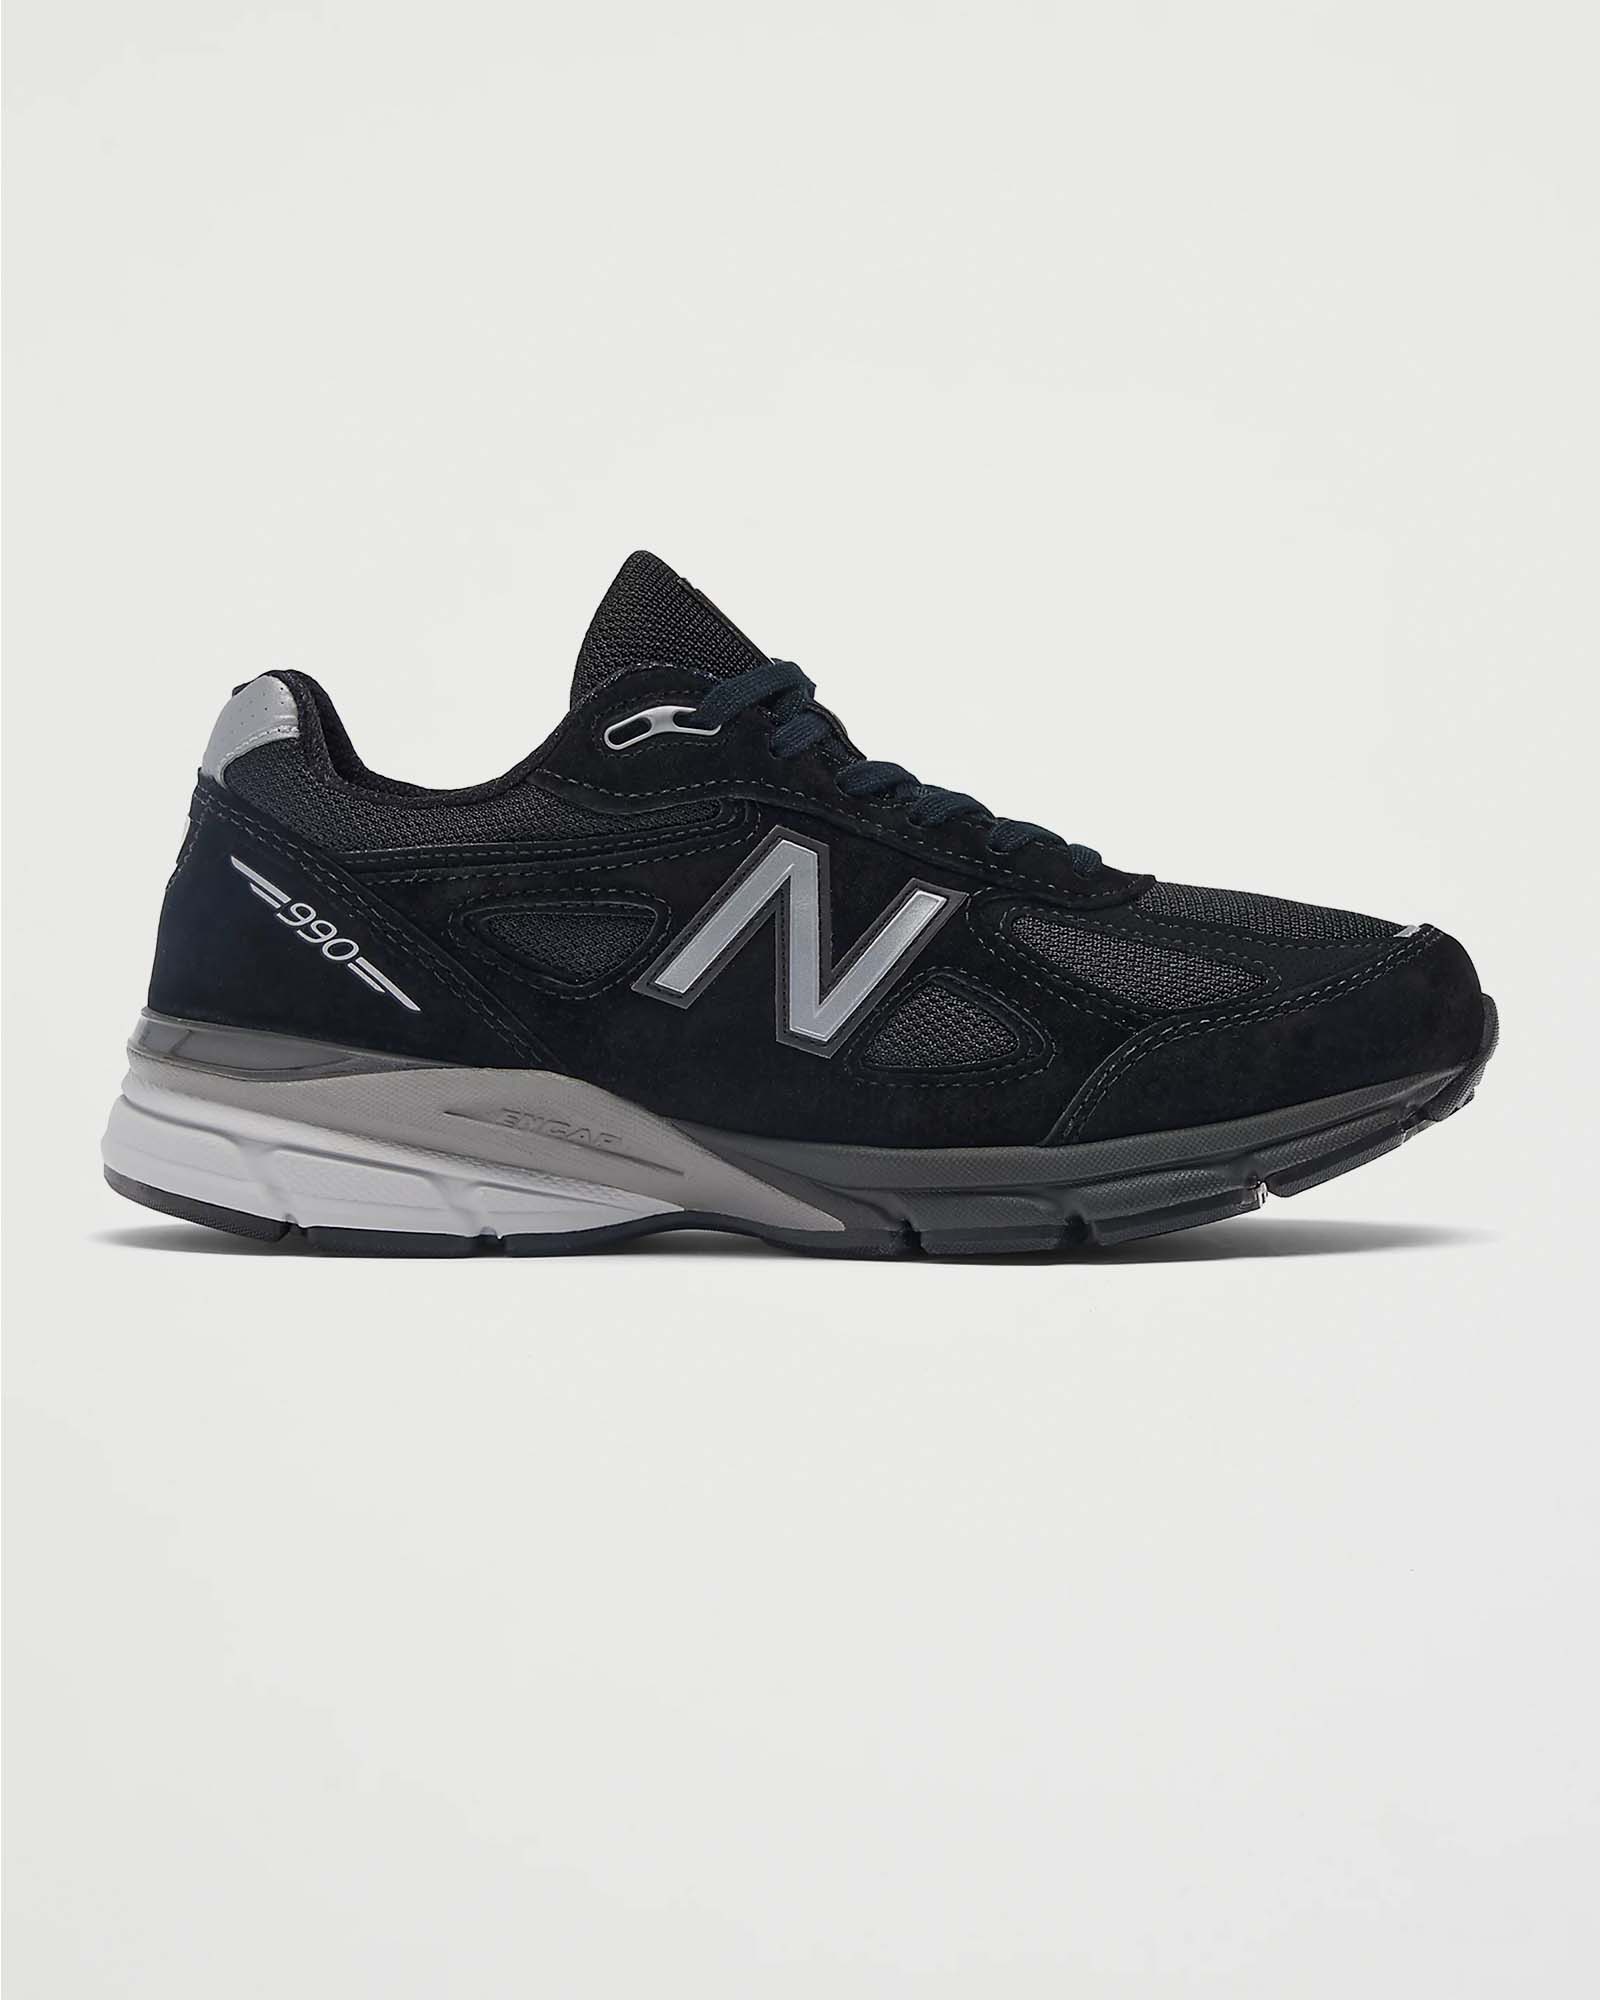 New Balance 990v4 'Made in USA' Black Shoes Sneakers Unisex